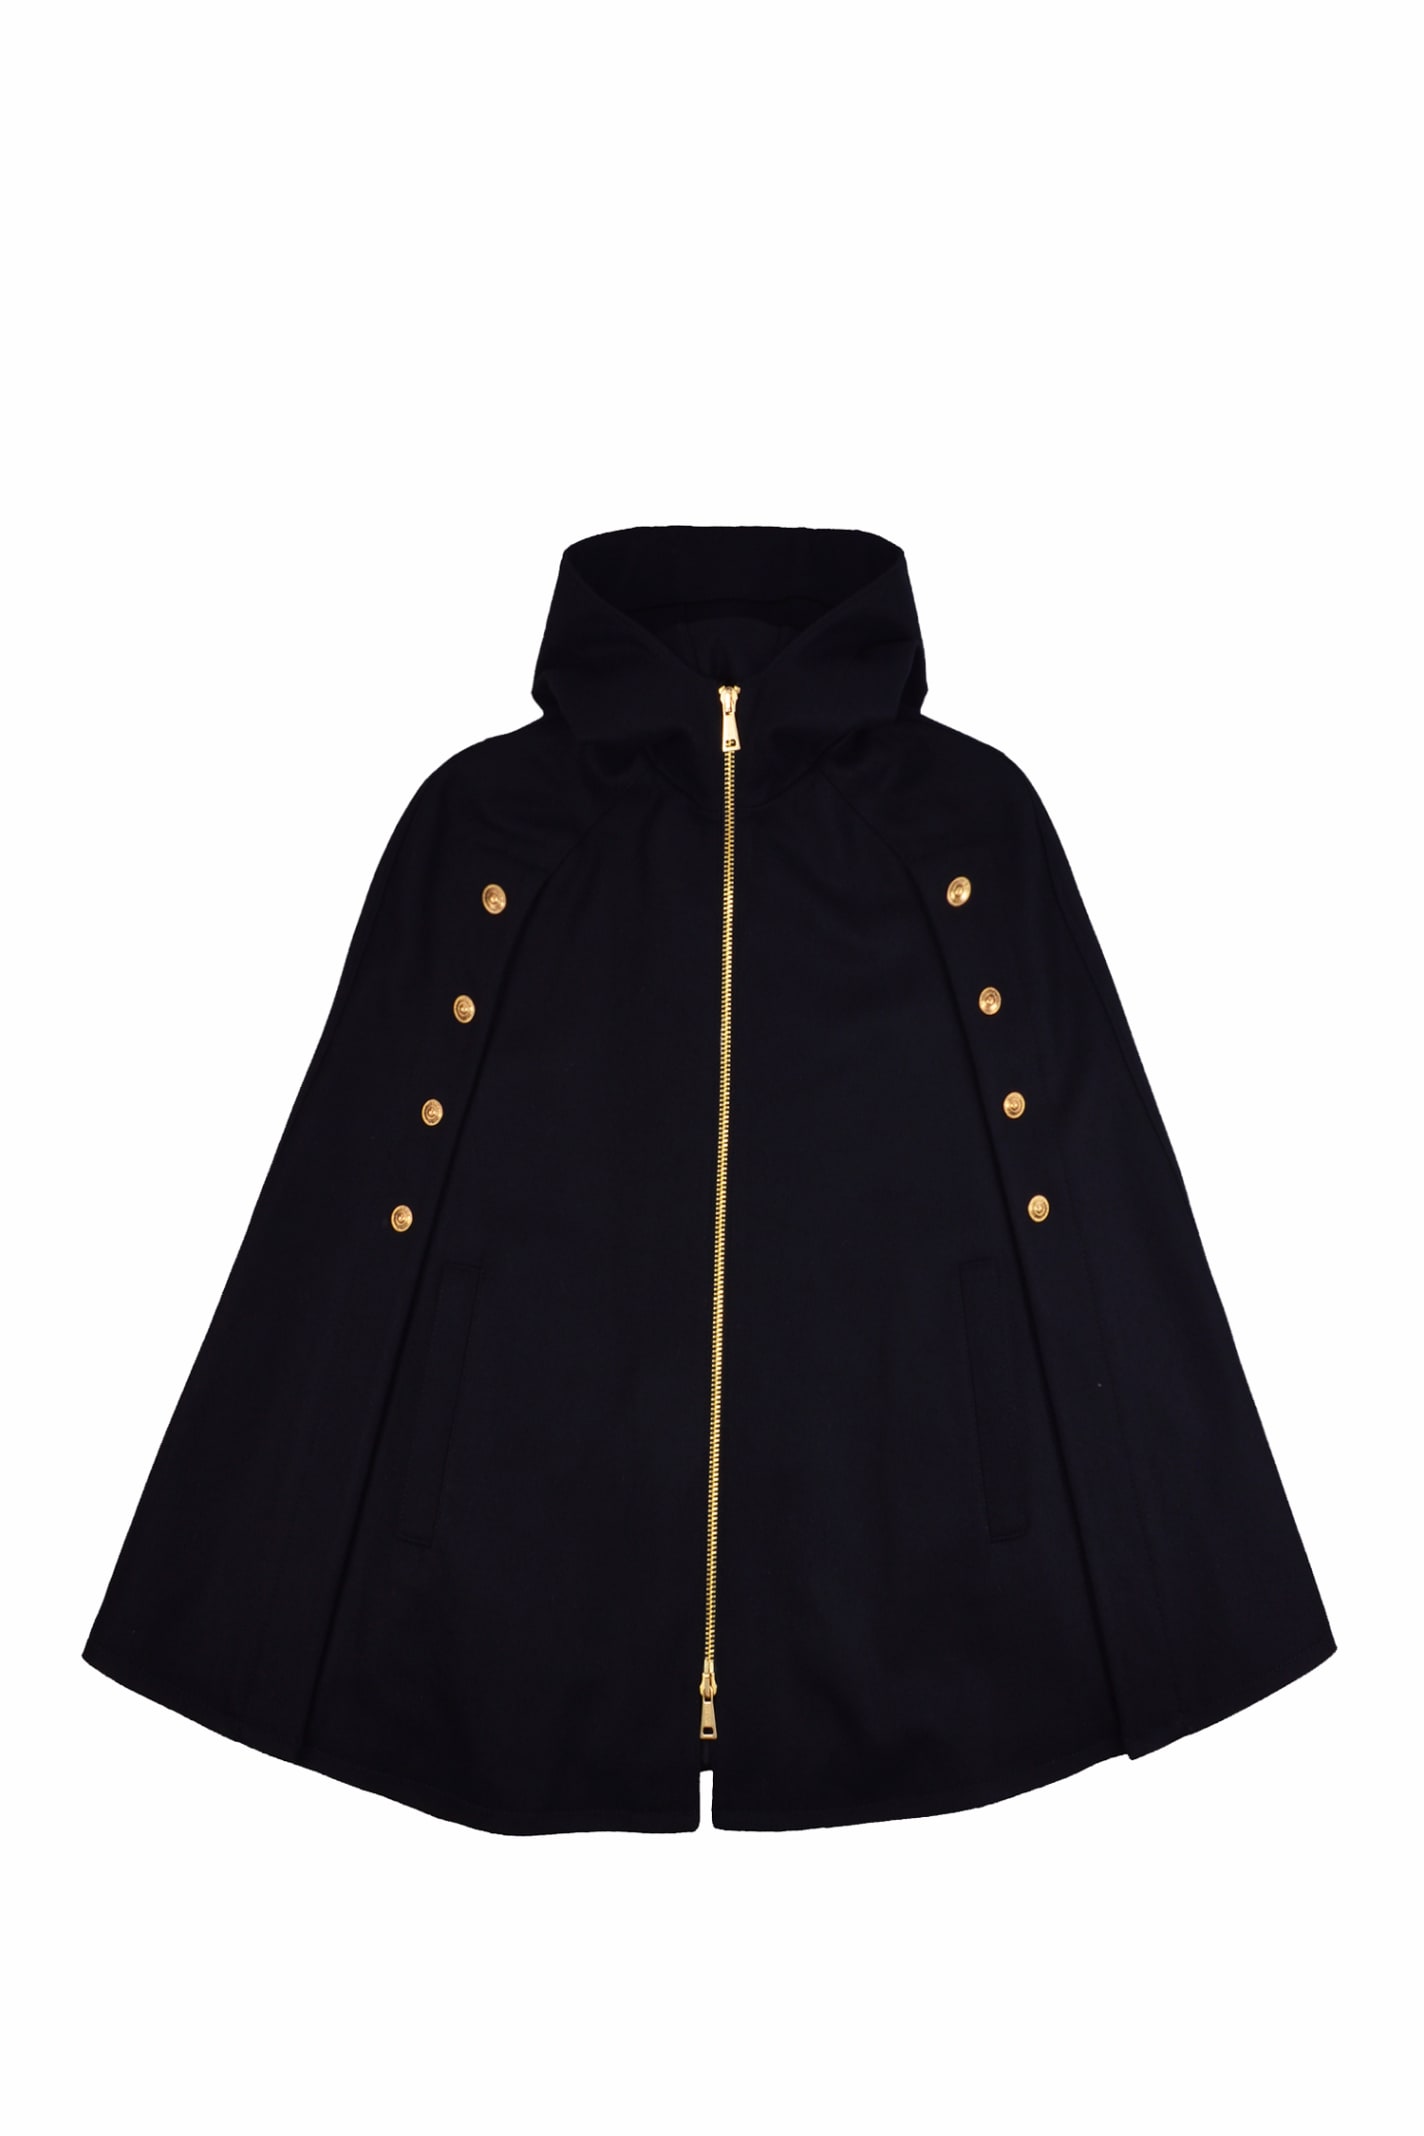 Versace Jeans Couture Wool Blend Cape